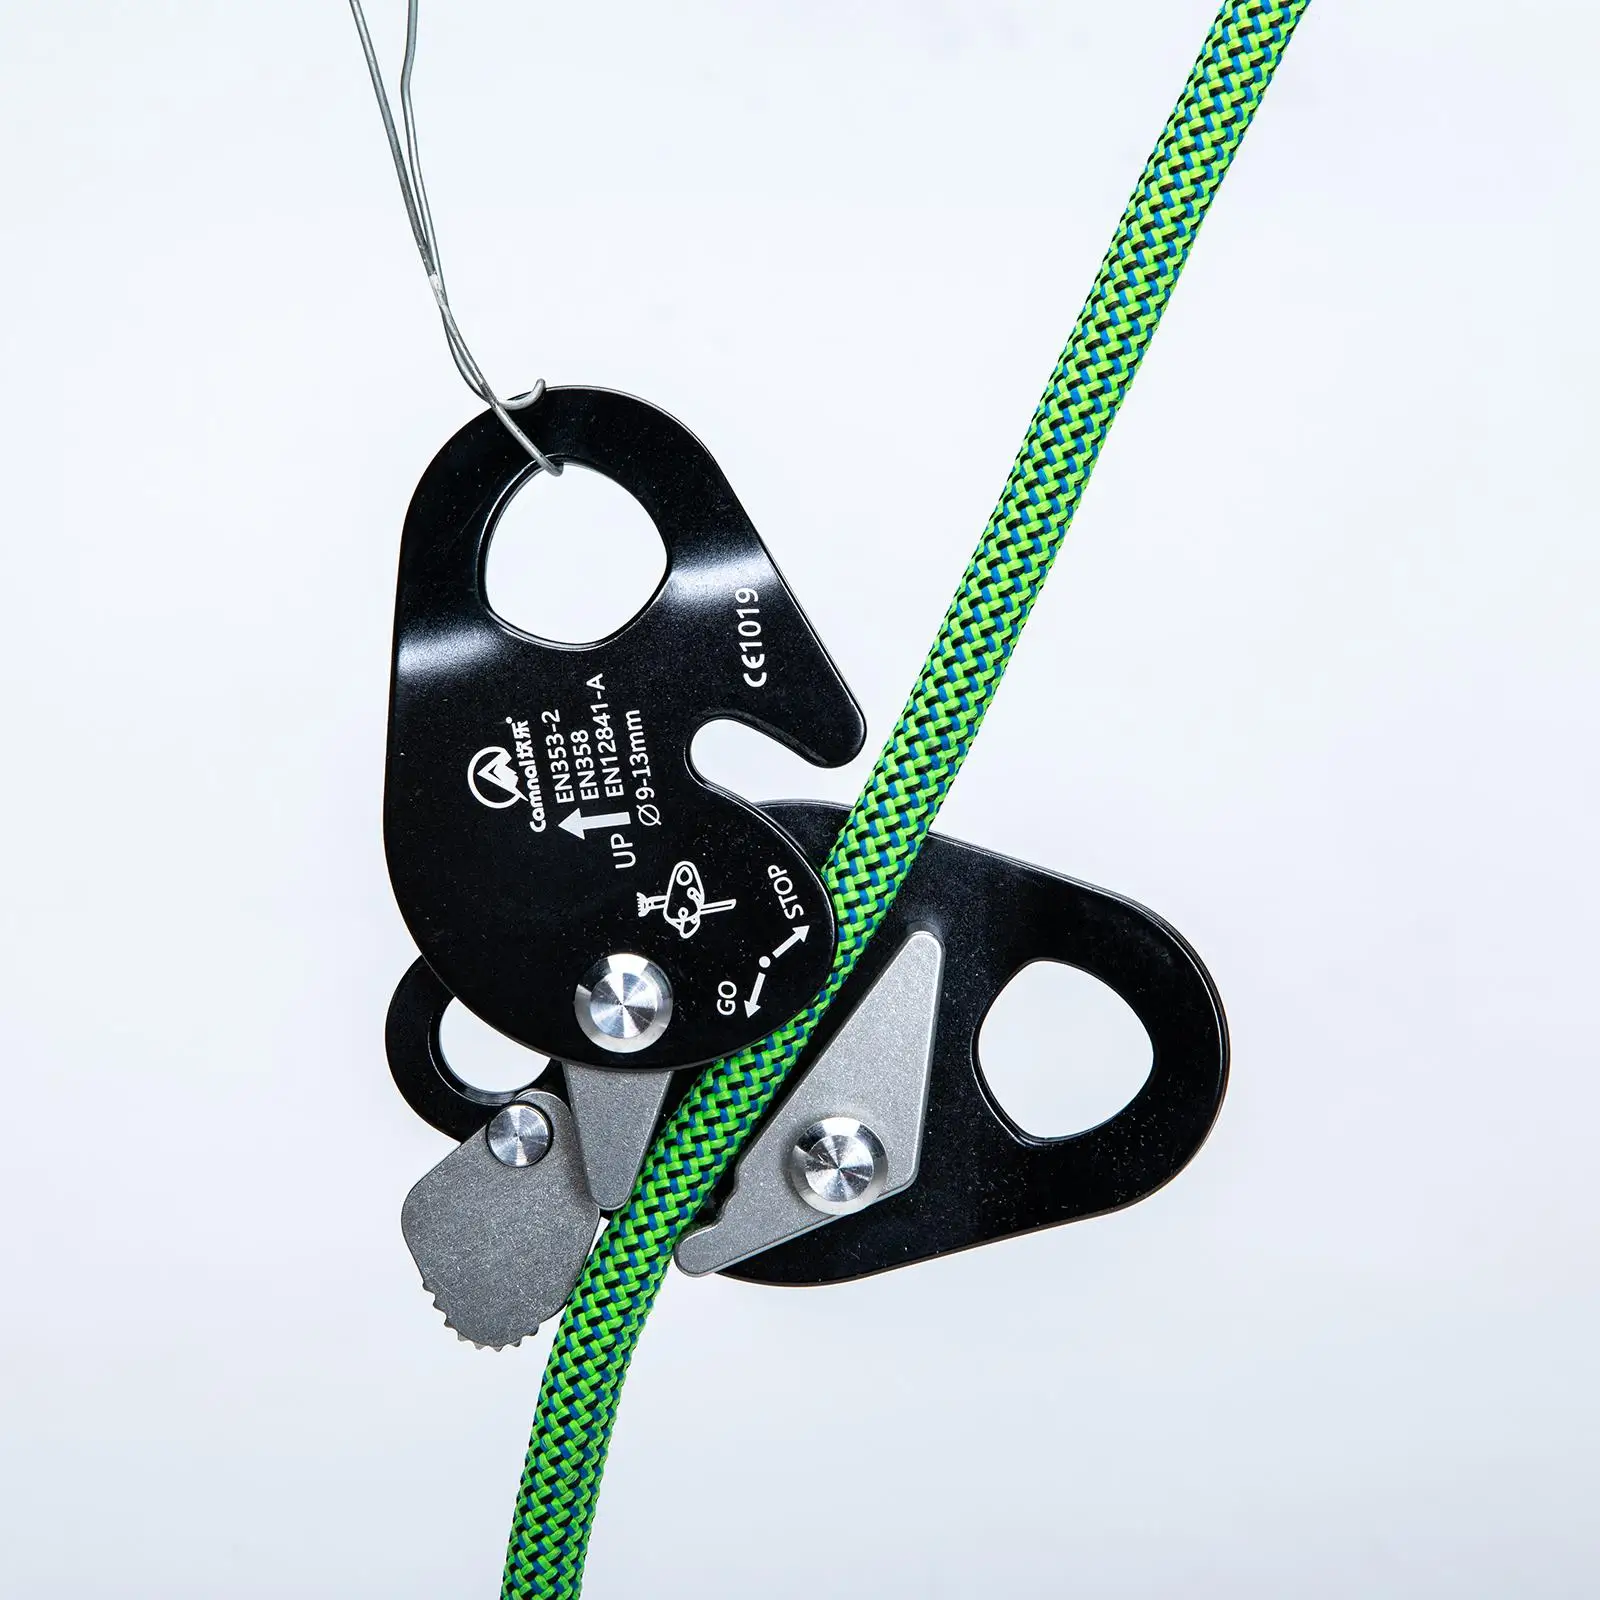 22KN Rope Grab with 25KN Carabiner for Climbing Tree Rigging Fall Protection 